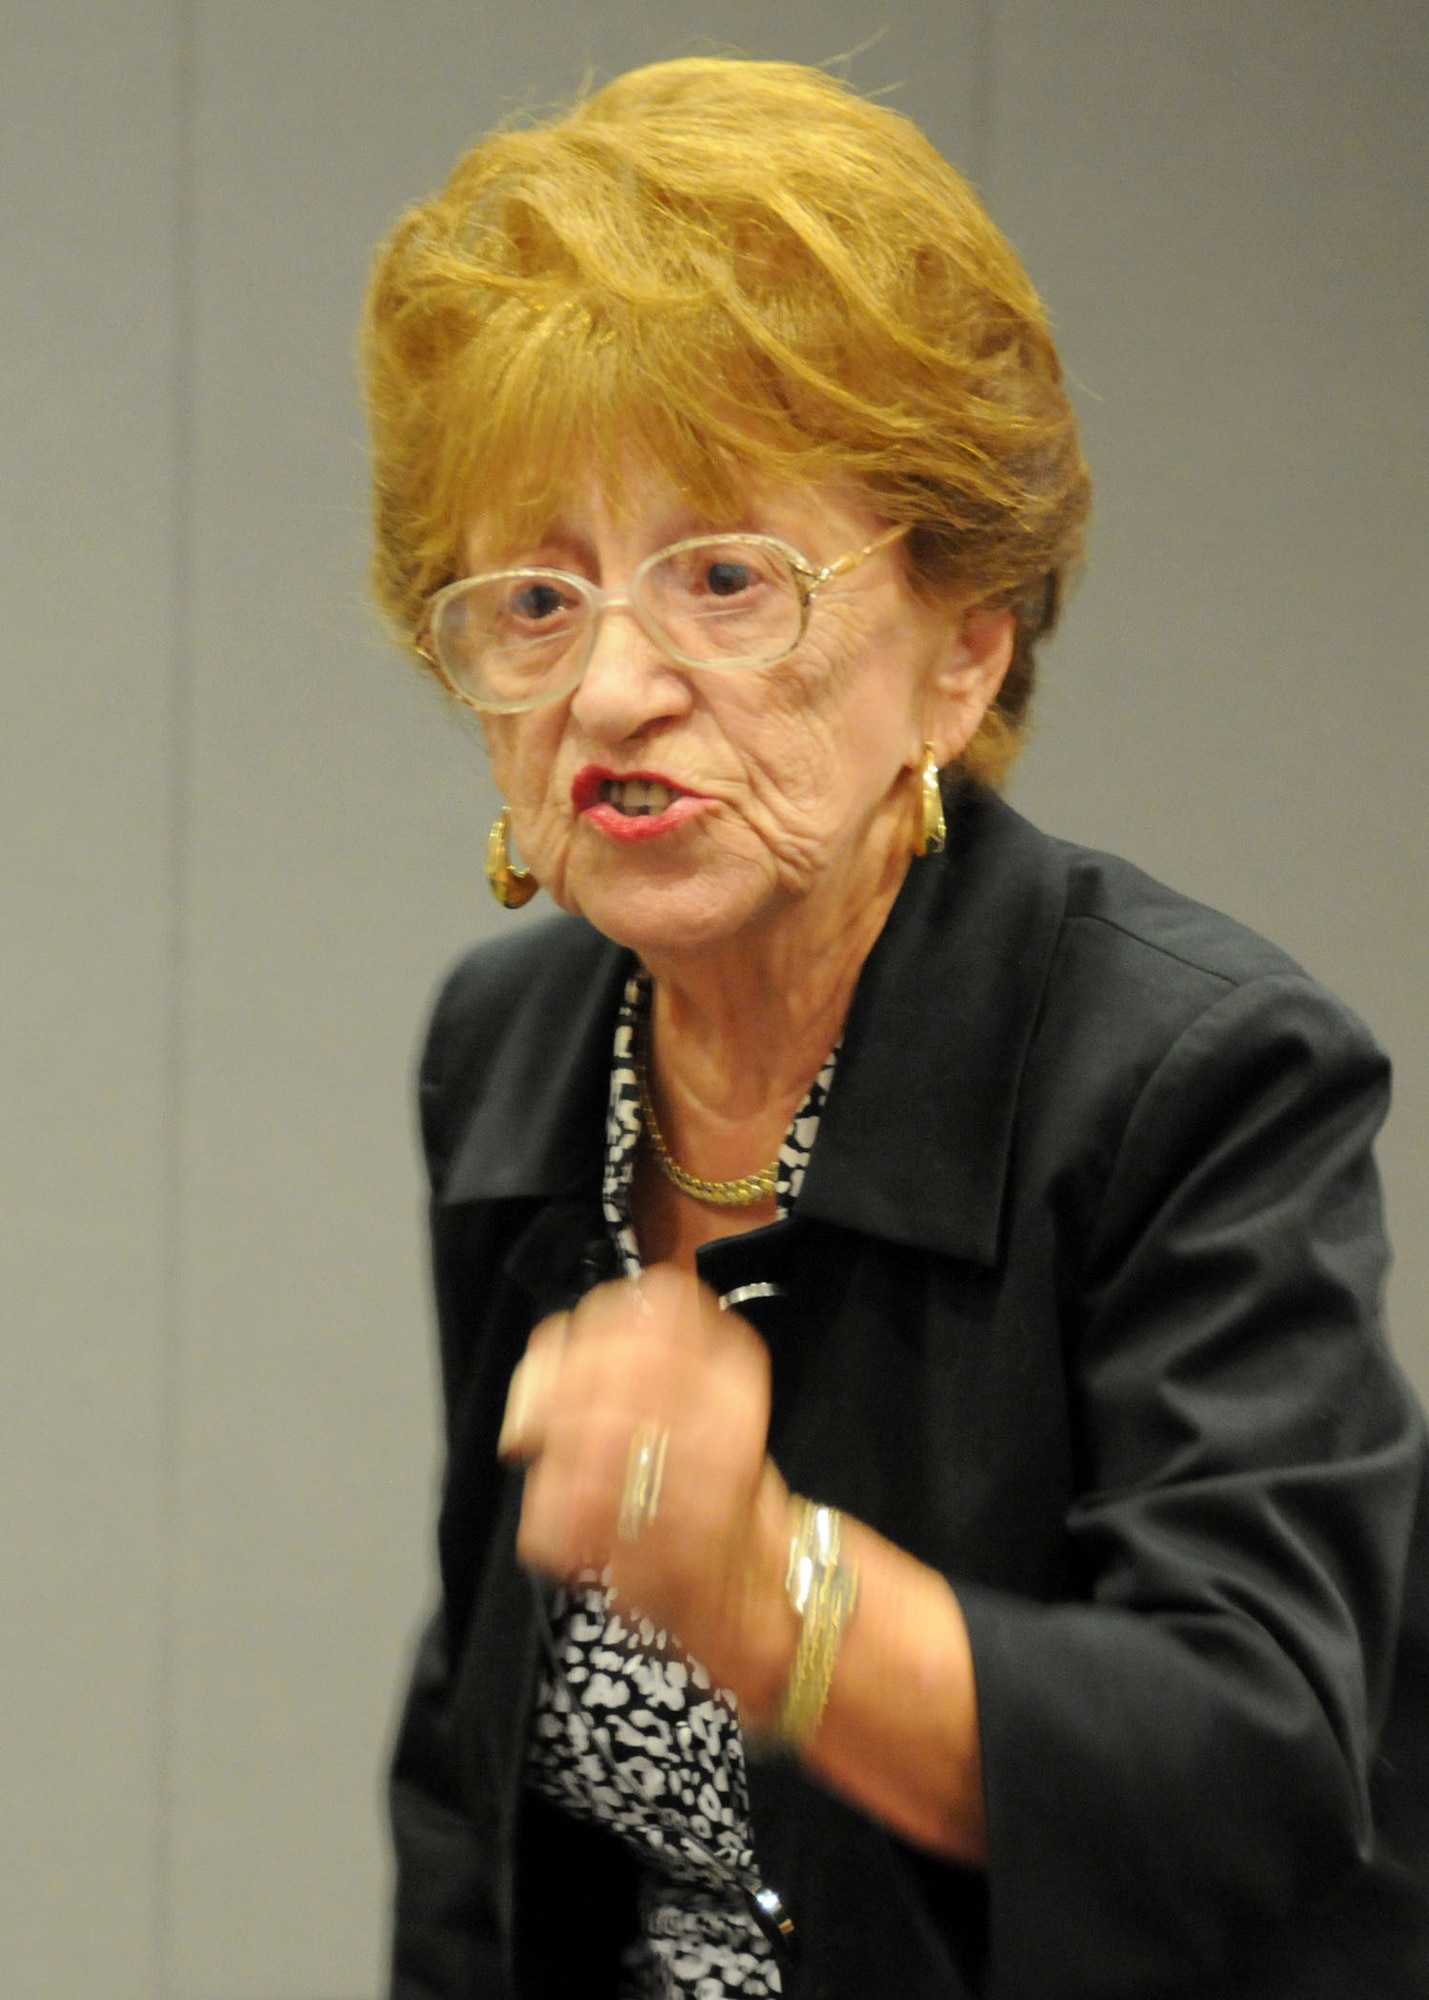 Holocaust survivor Regina Hirsch speaks with conviction as she recounts her experience to the group gathered to listen to her talk during the Space and Missile Systems Center Holocaust Memorial Observance, April 12. Ms Hirsch endured beatings and hunger and witness torture and murder of Jews, including her own family, during the Holocaust. (Photo by Joe Juarez)